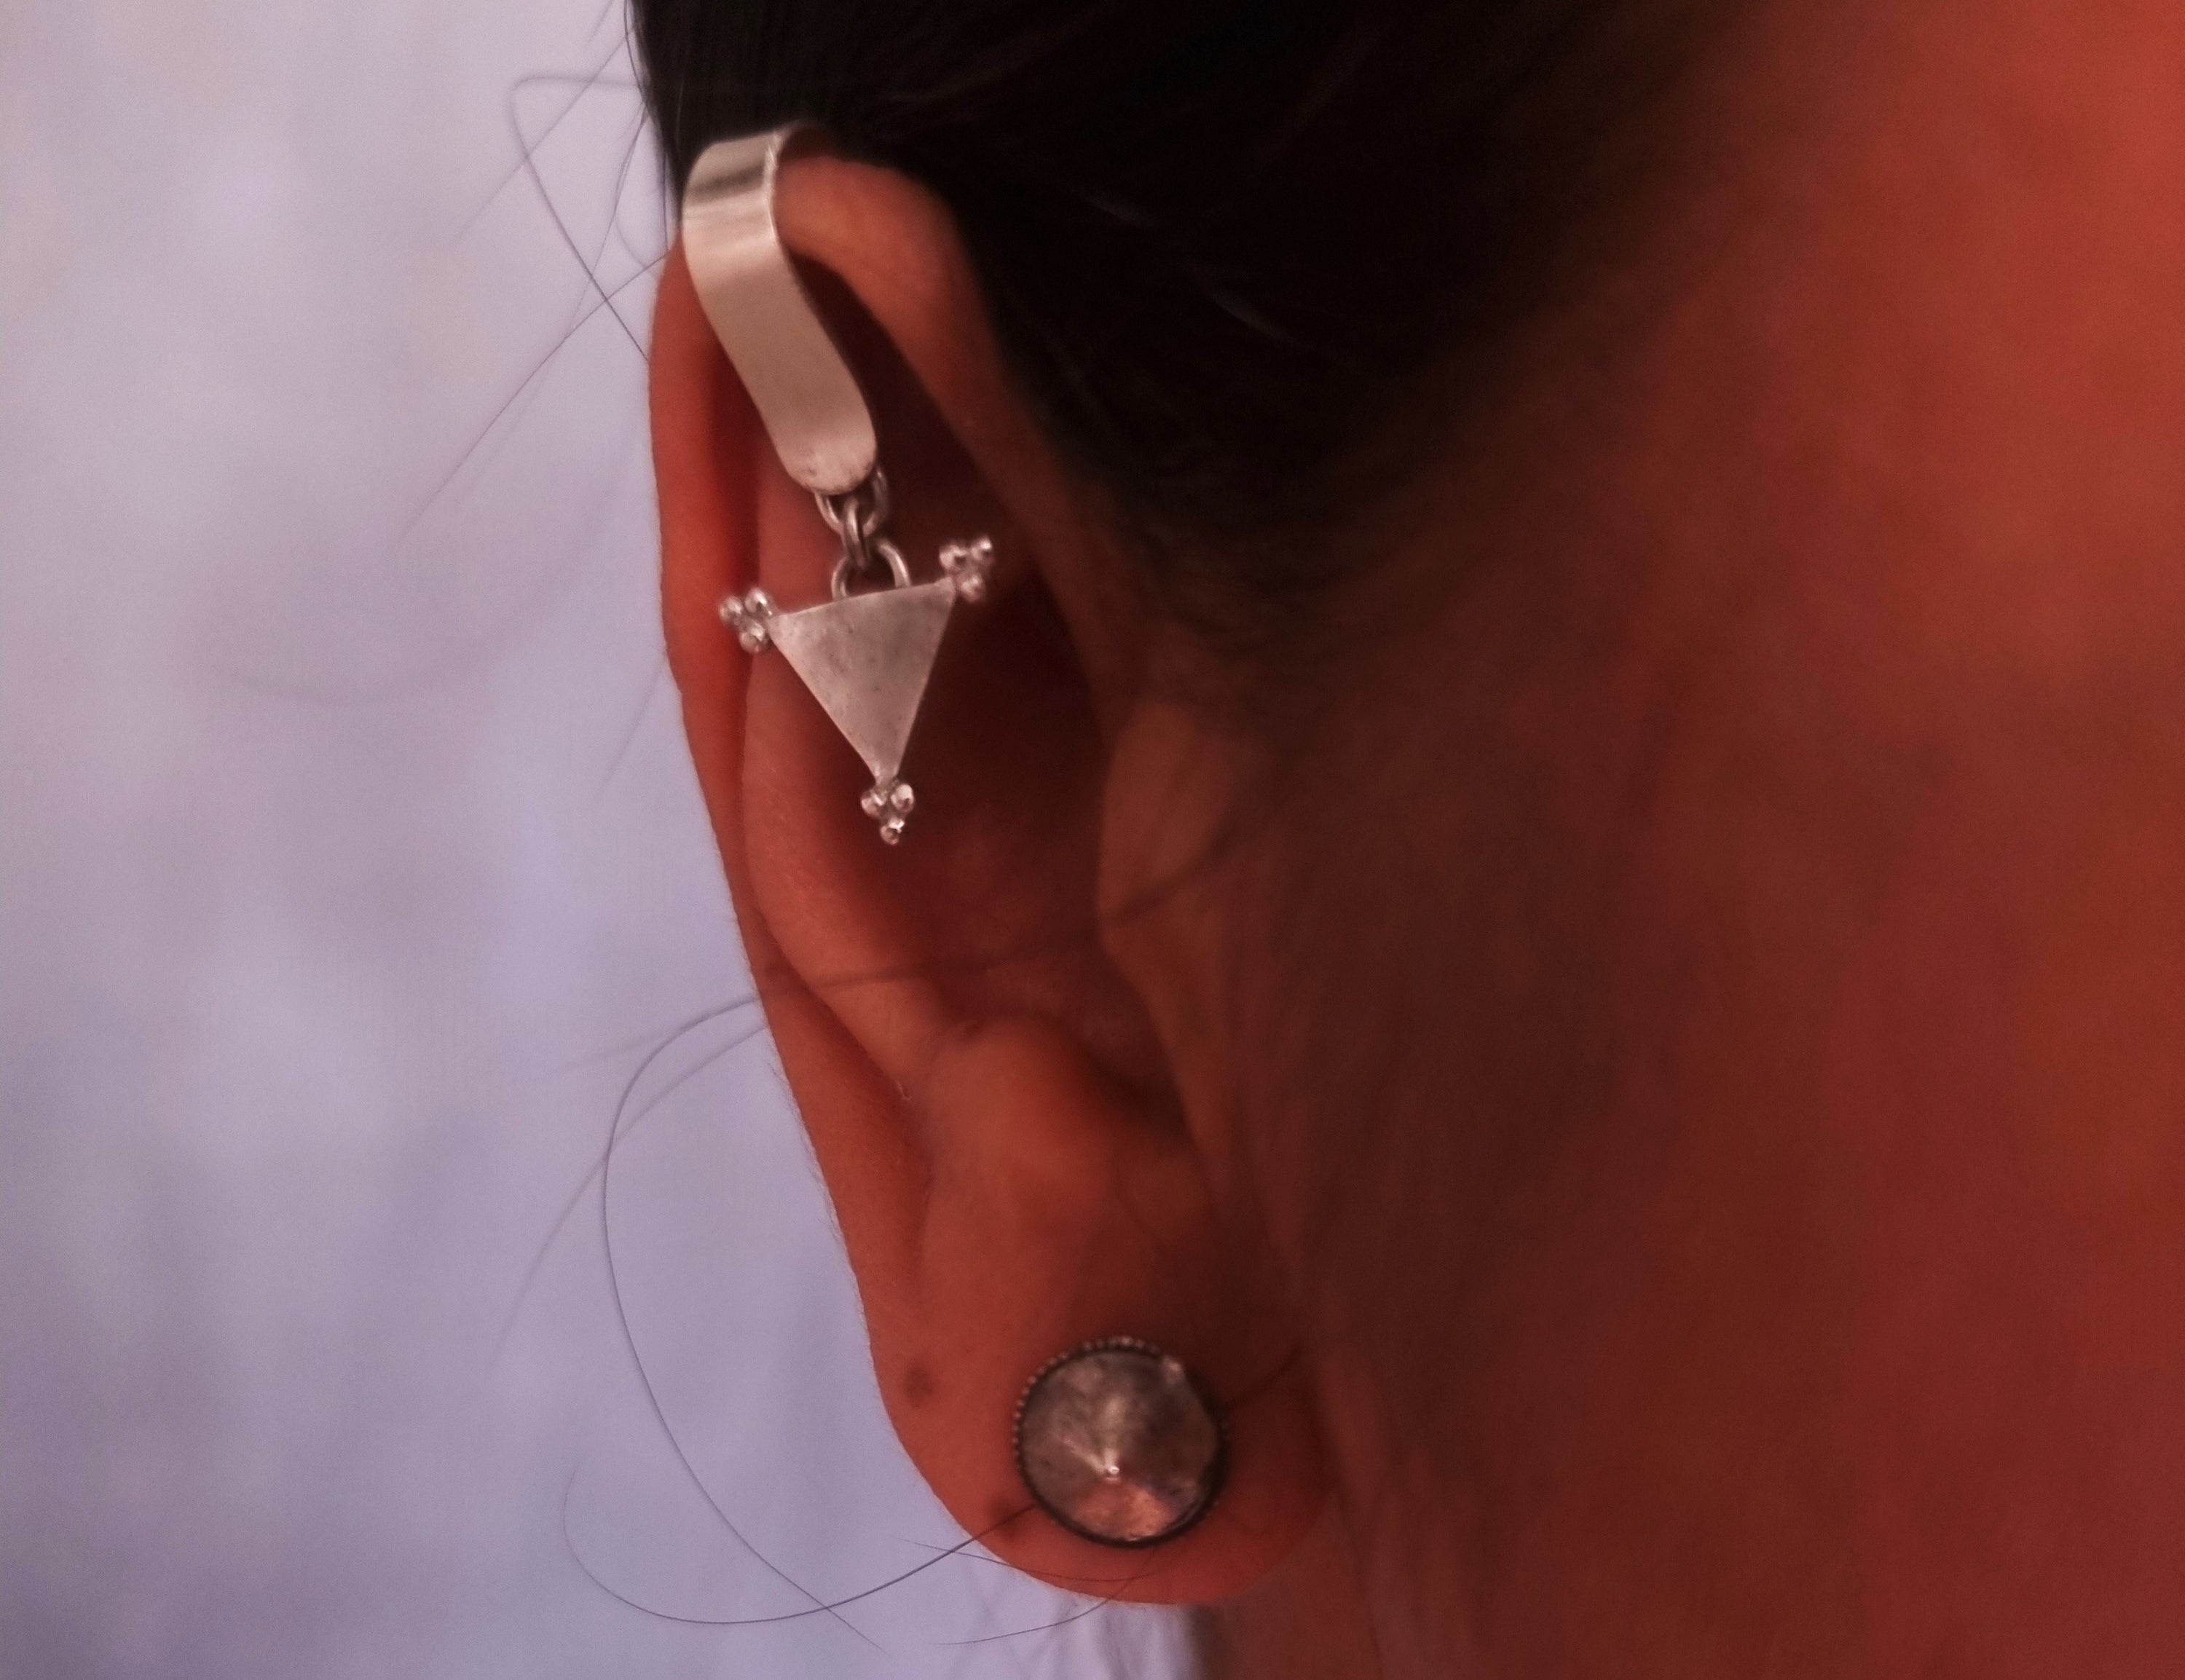 Buy Silver Earclip Online In India - Tribal Trikone Earclip - Quirksmith 